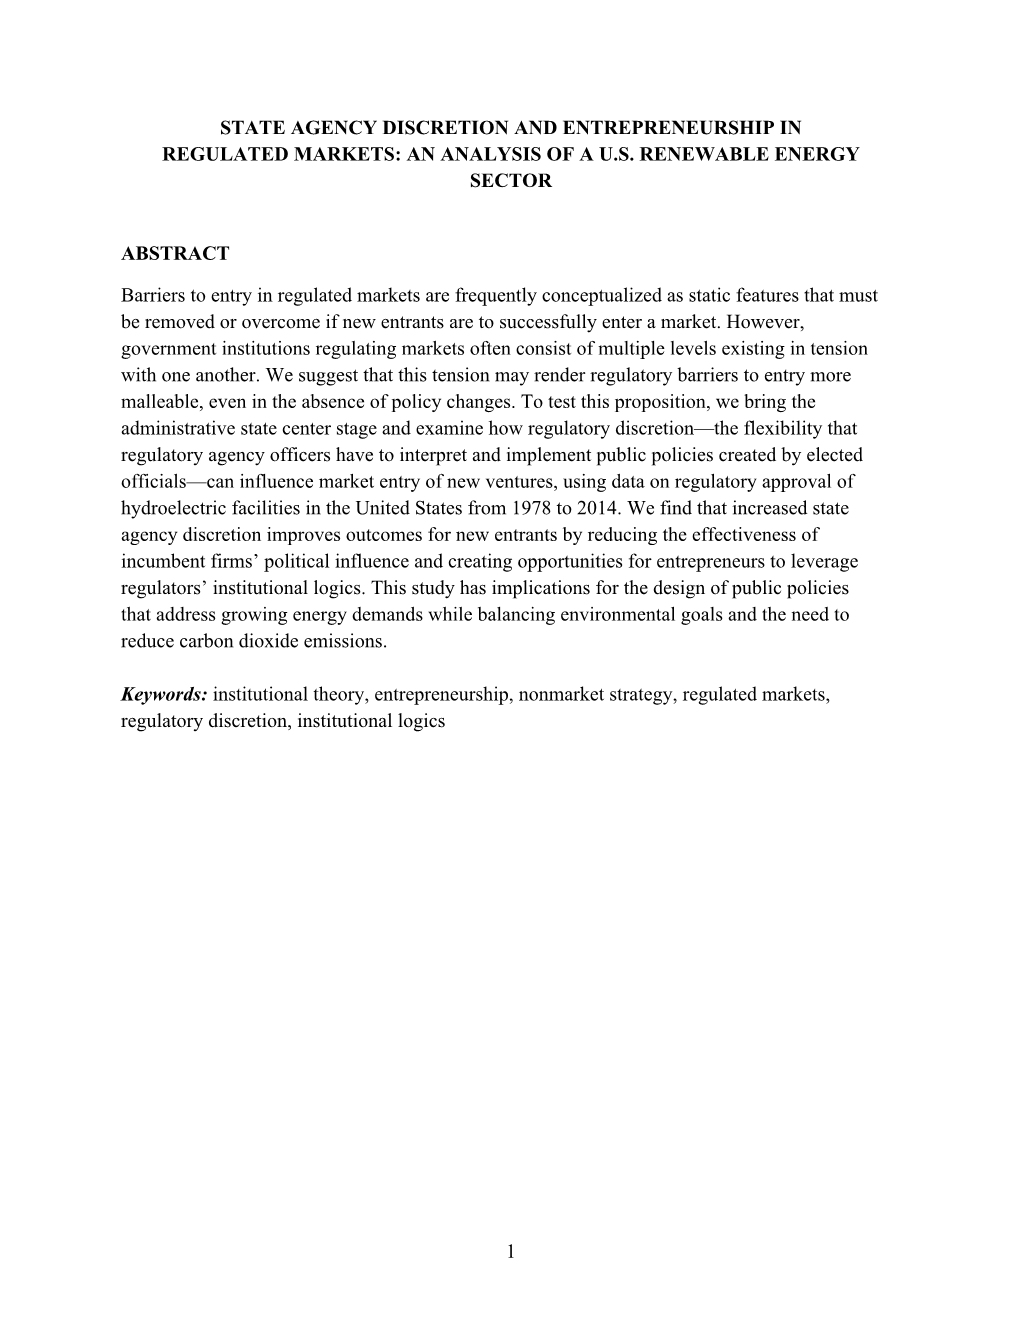 State Agency Discretion and Entrepreneurship in Regulated Markets: an Analysis of a U.S